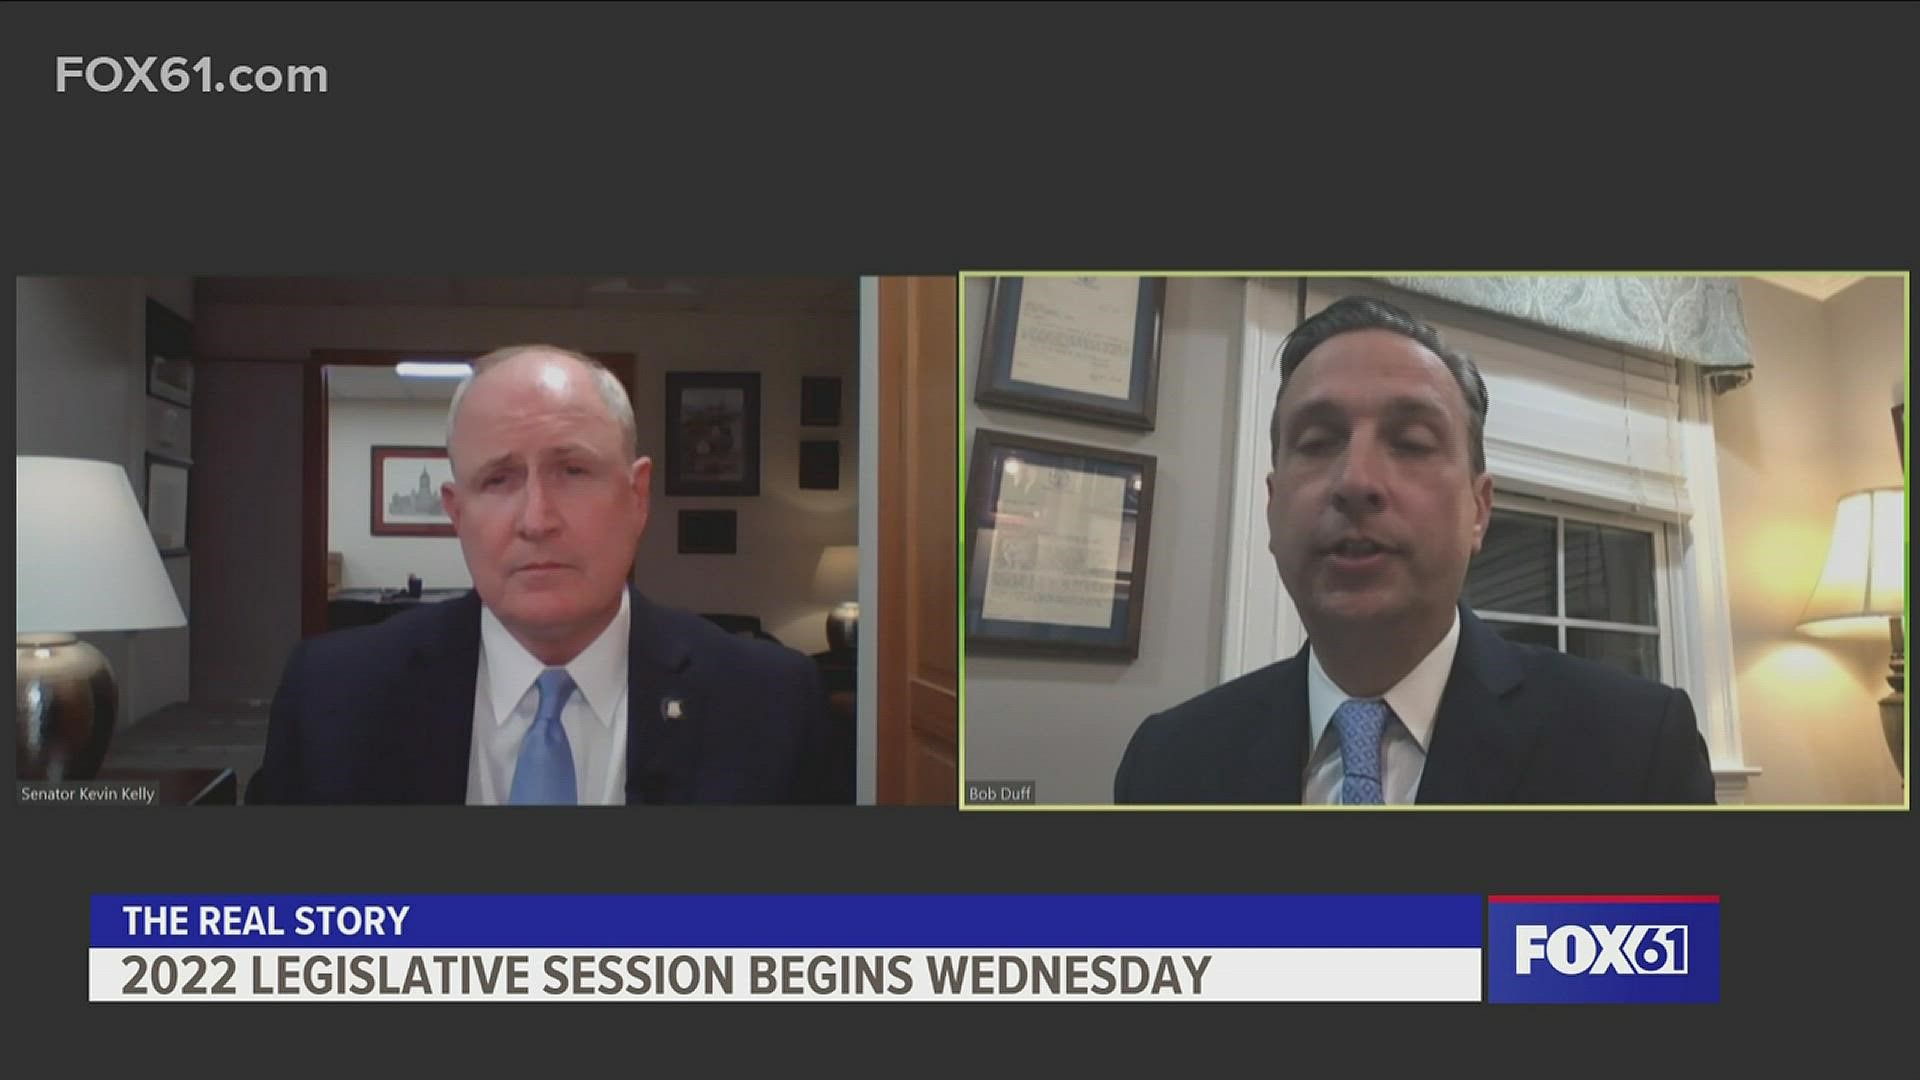 State Senators Bob Duff and Kevin Kelly join Real Story host Jenn Bernstein to talk about the priorities in the upcoming session.